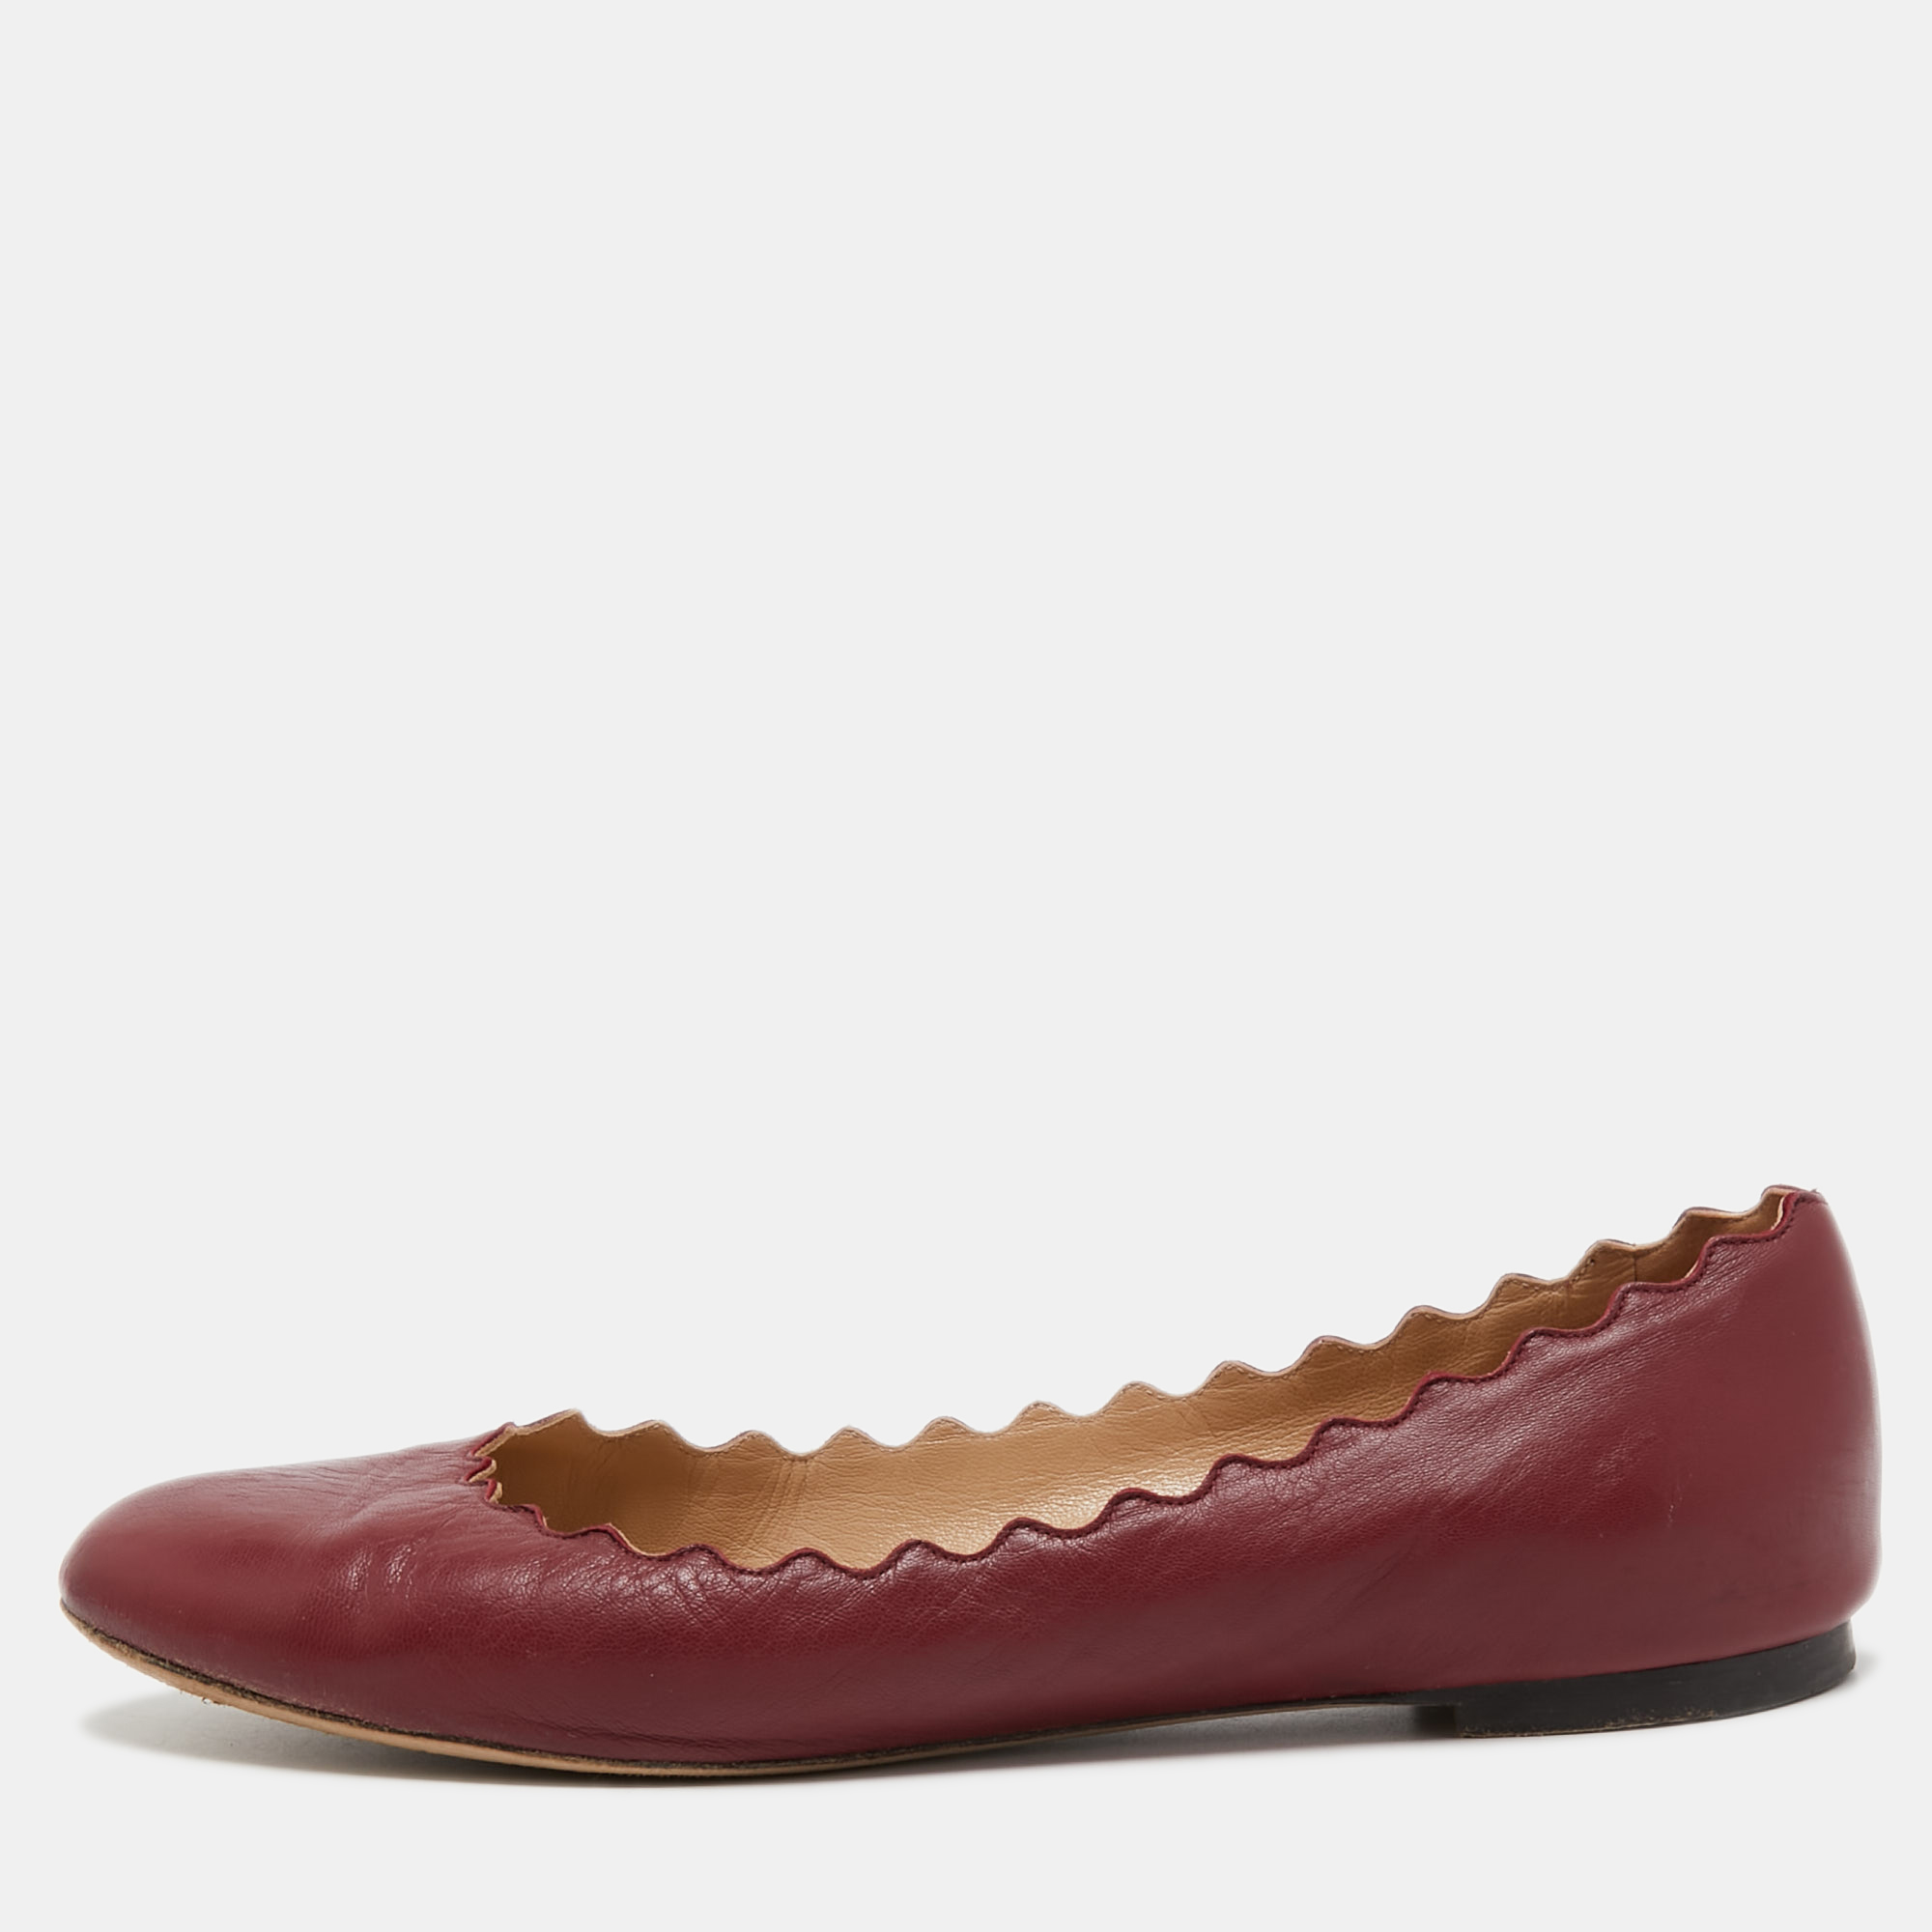 Pre-owned Chloé Burgundy Leather Scalloped Ballet Flats Size 39